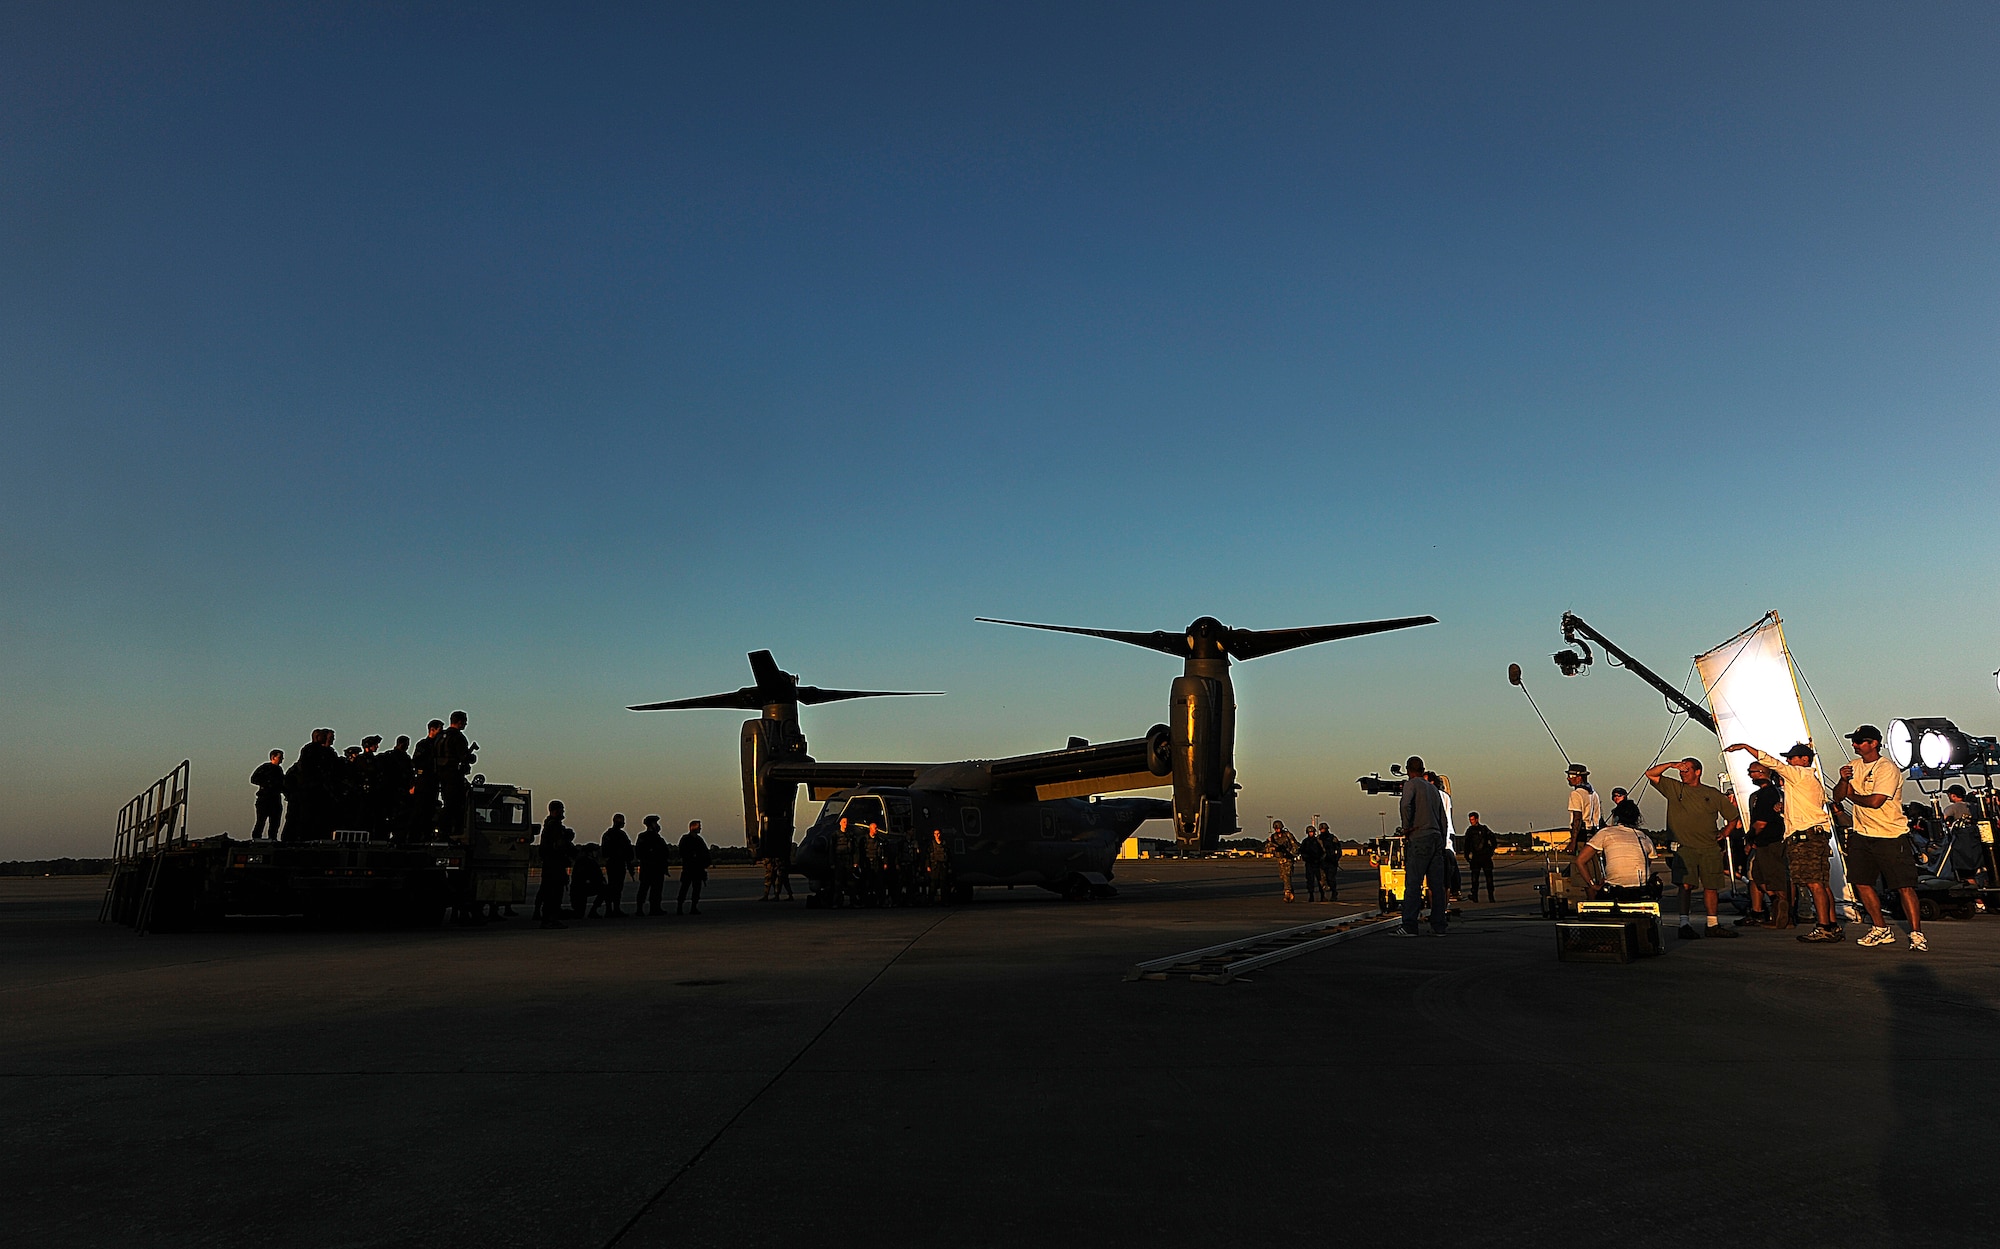 Transformers 3 Movie Set, shot at Hurlburt Field, Fla., Sep 29, 2010. The movie is directed by Michael Bay and stars Josh Duhamel. (U.S. Air Force Photo by Master Sgt. Russell E Cooley IV/Released)